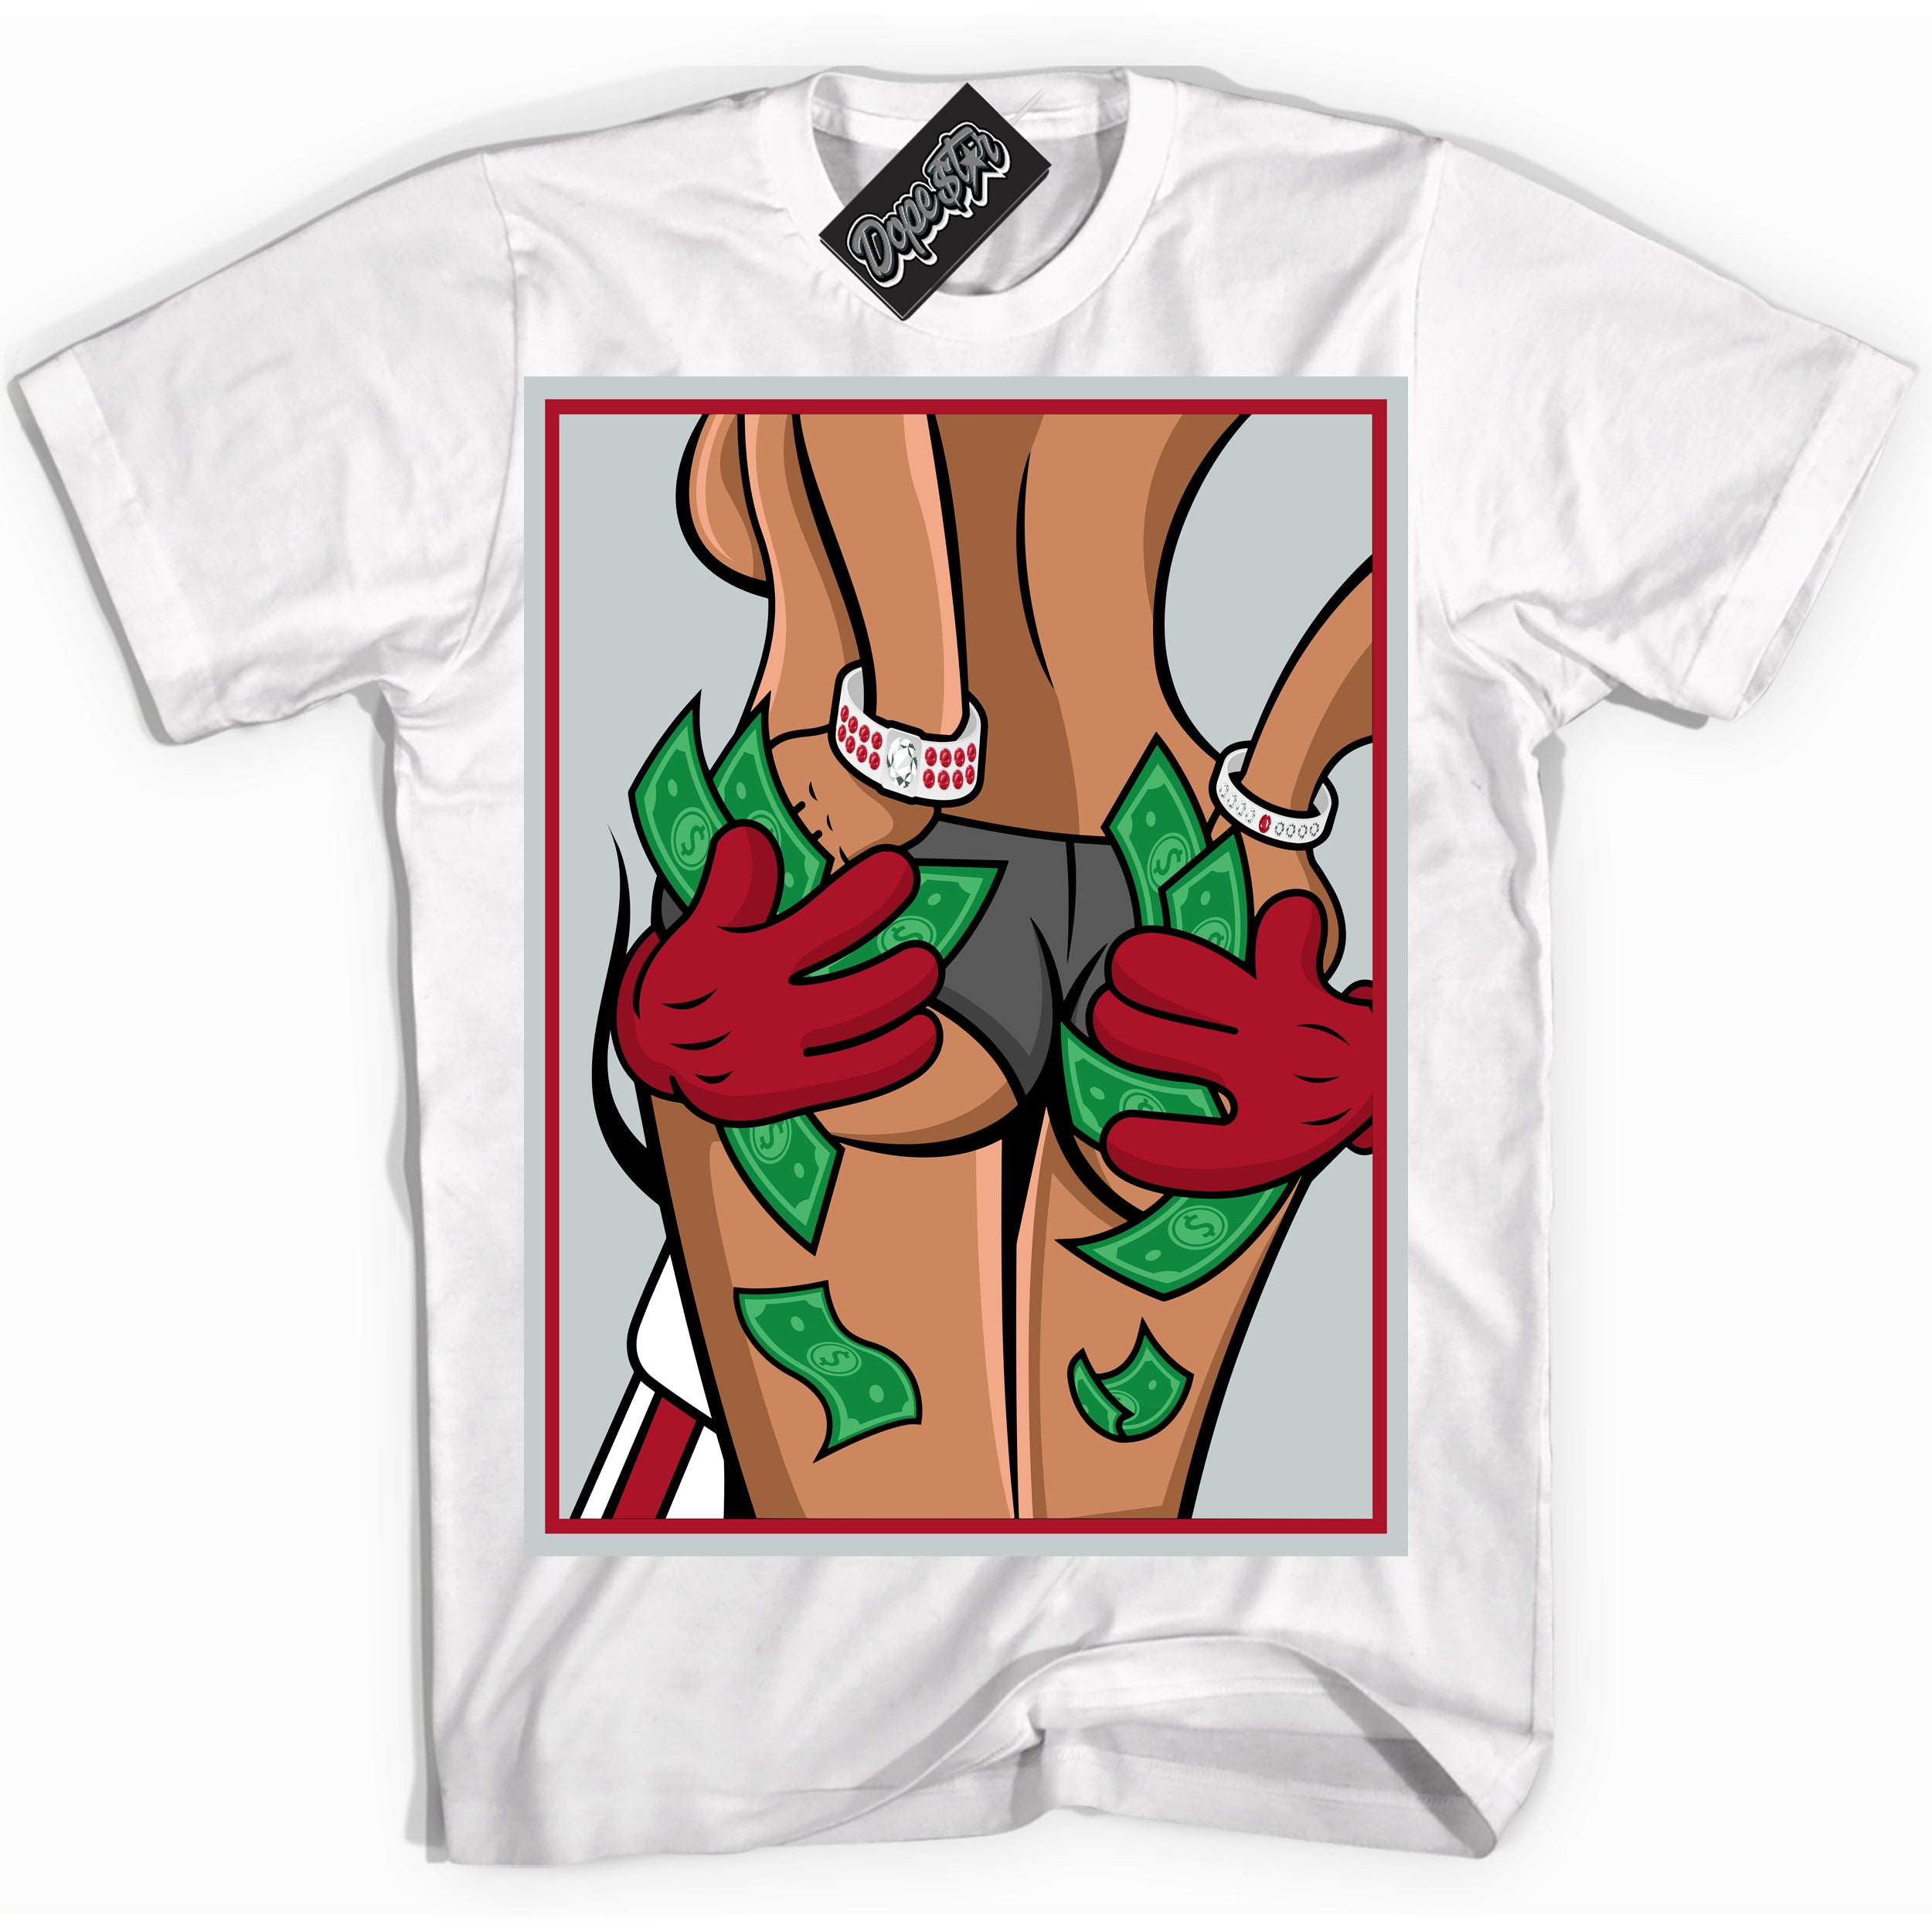 Cool White Shirt with “ Money Hands” design that perfectly matches Reverse Ultraman Sneakers.